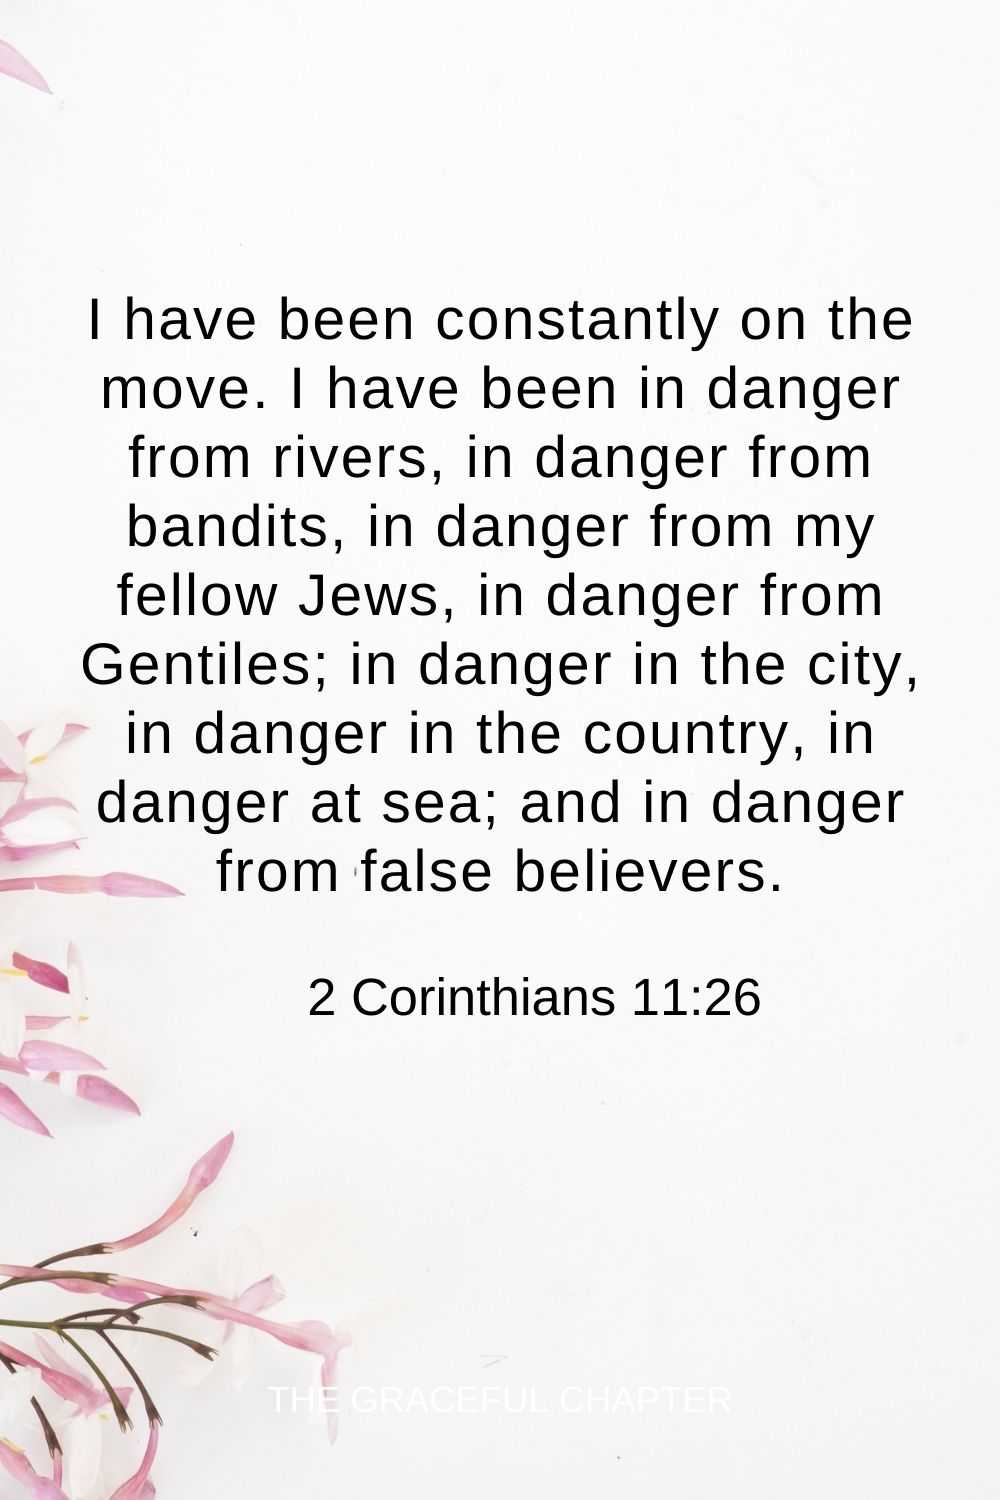 I have been constantly on the move. I have been in danger from rivers, in danger from bandits, in danger from my fellow Jews, in danger from Gentiles; in danger in the city, in danger in the country, in danger at sea; and in danger from false believers. 2 Corinthians 11:26